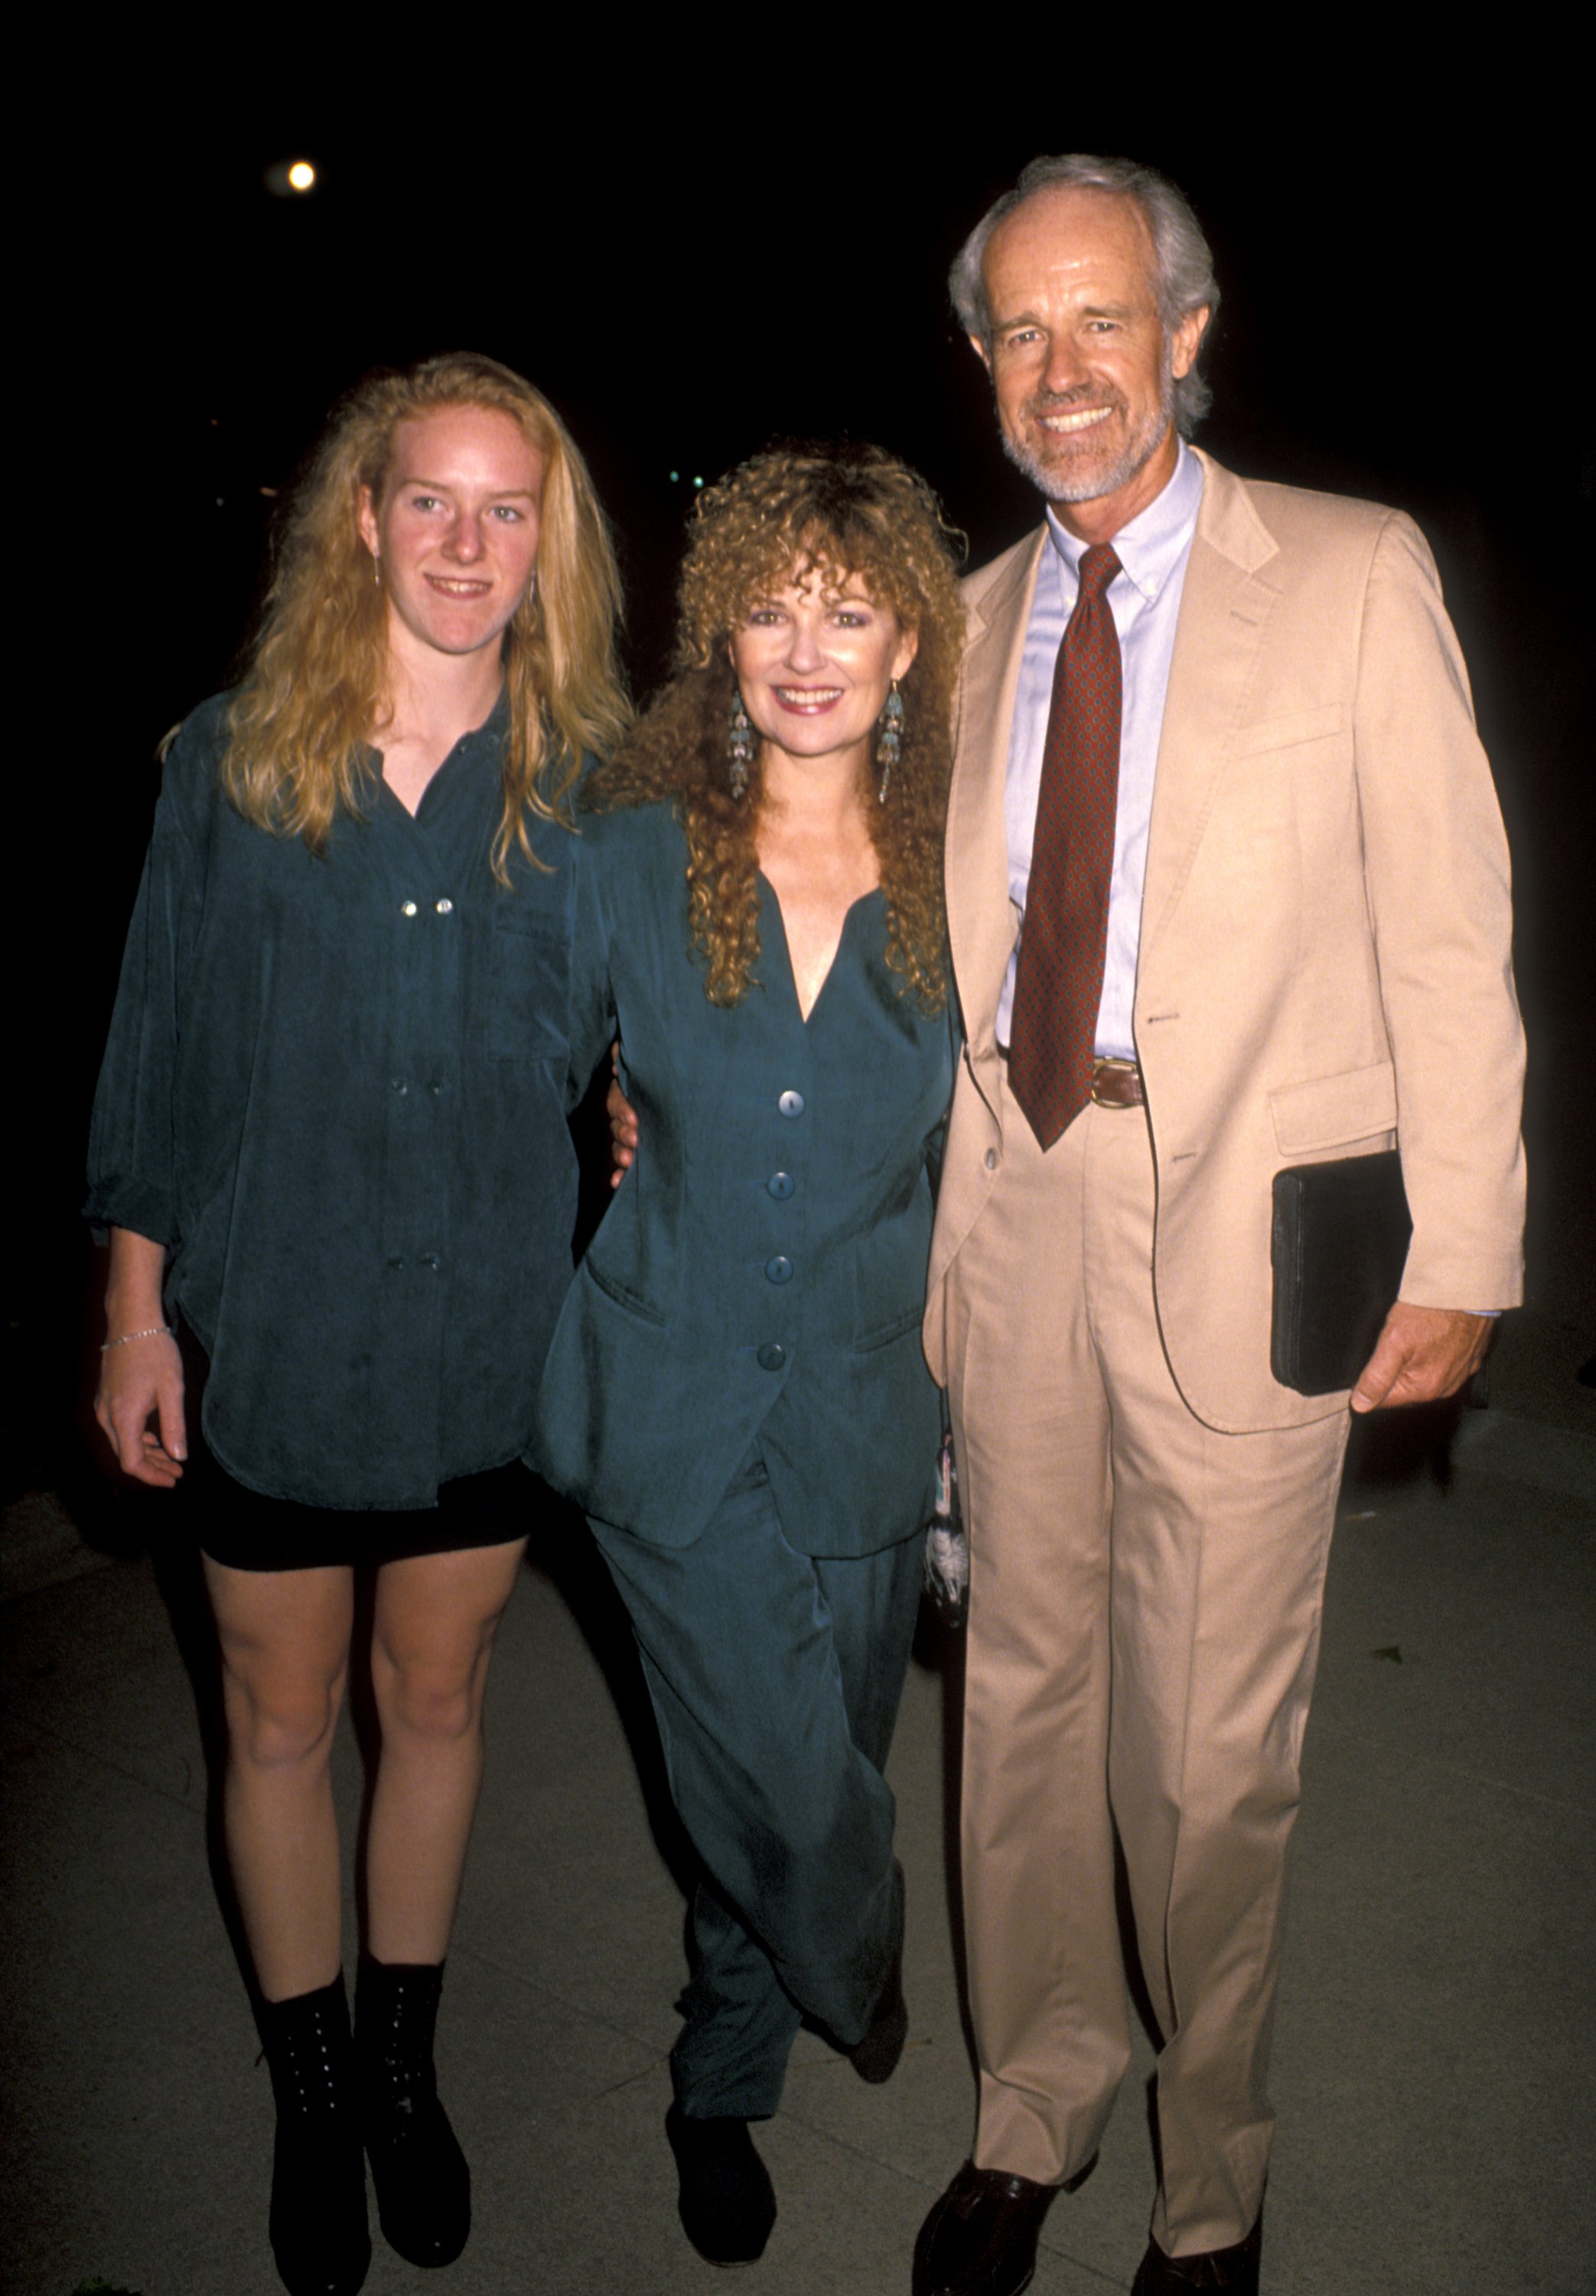 Erin Farrell, Shelley Fabares, and Mike Farrell at the "ABC Fall Premiere Party" on September 12, 1990 | Source: Getty Images